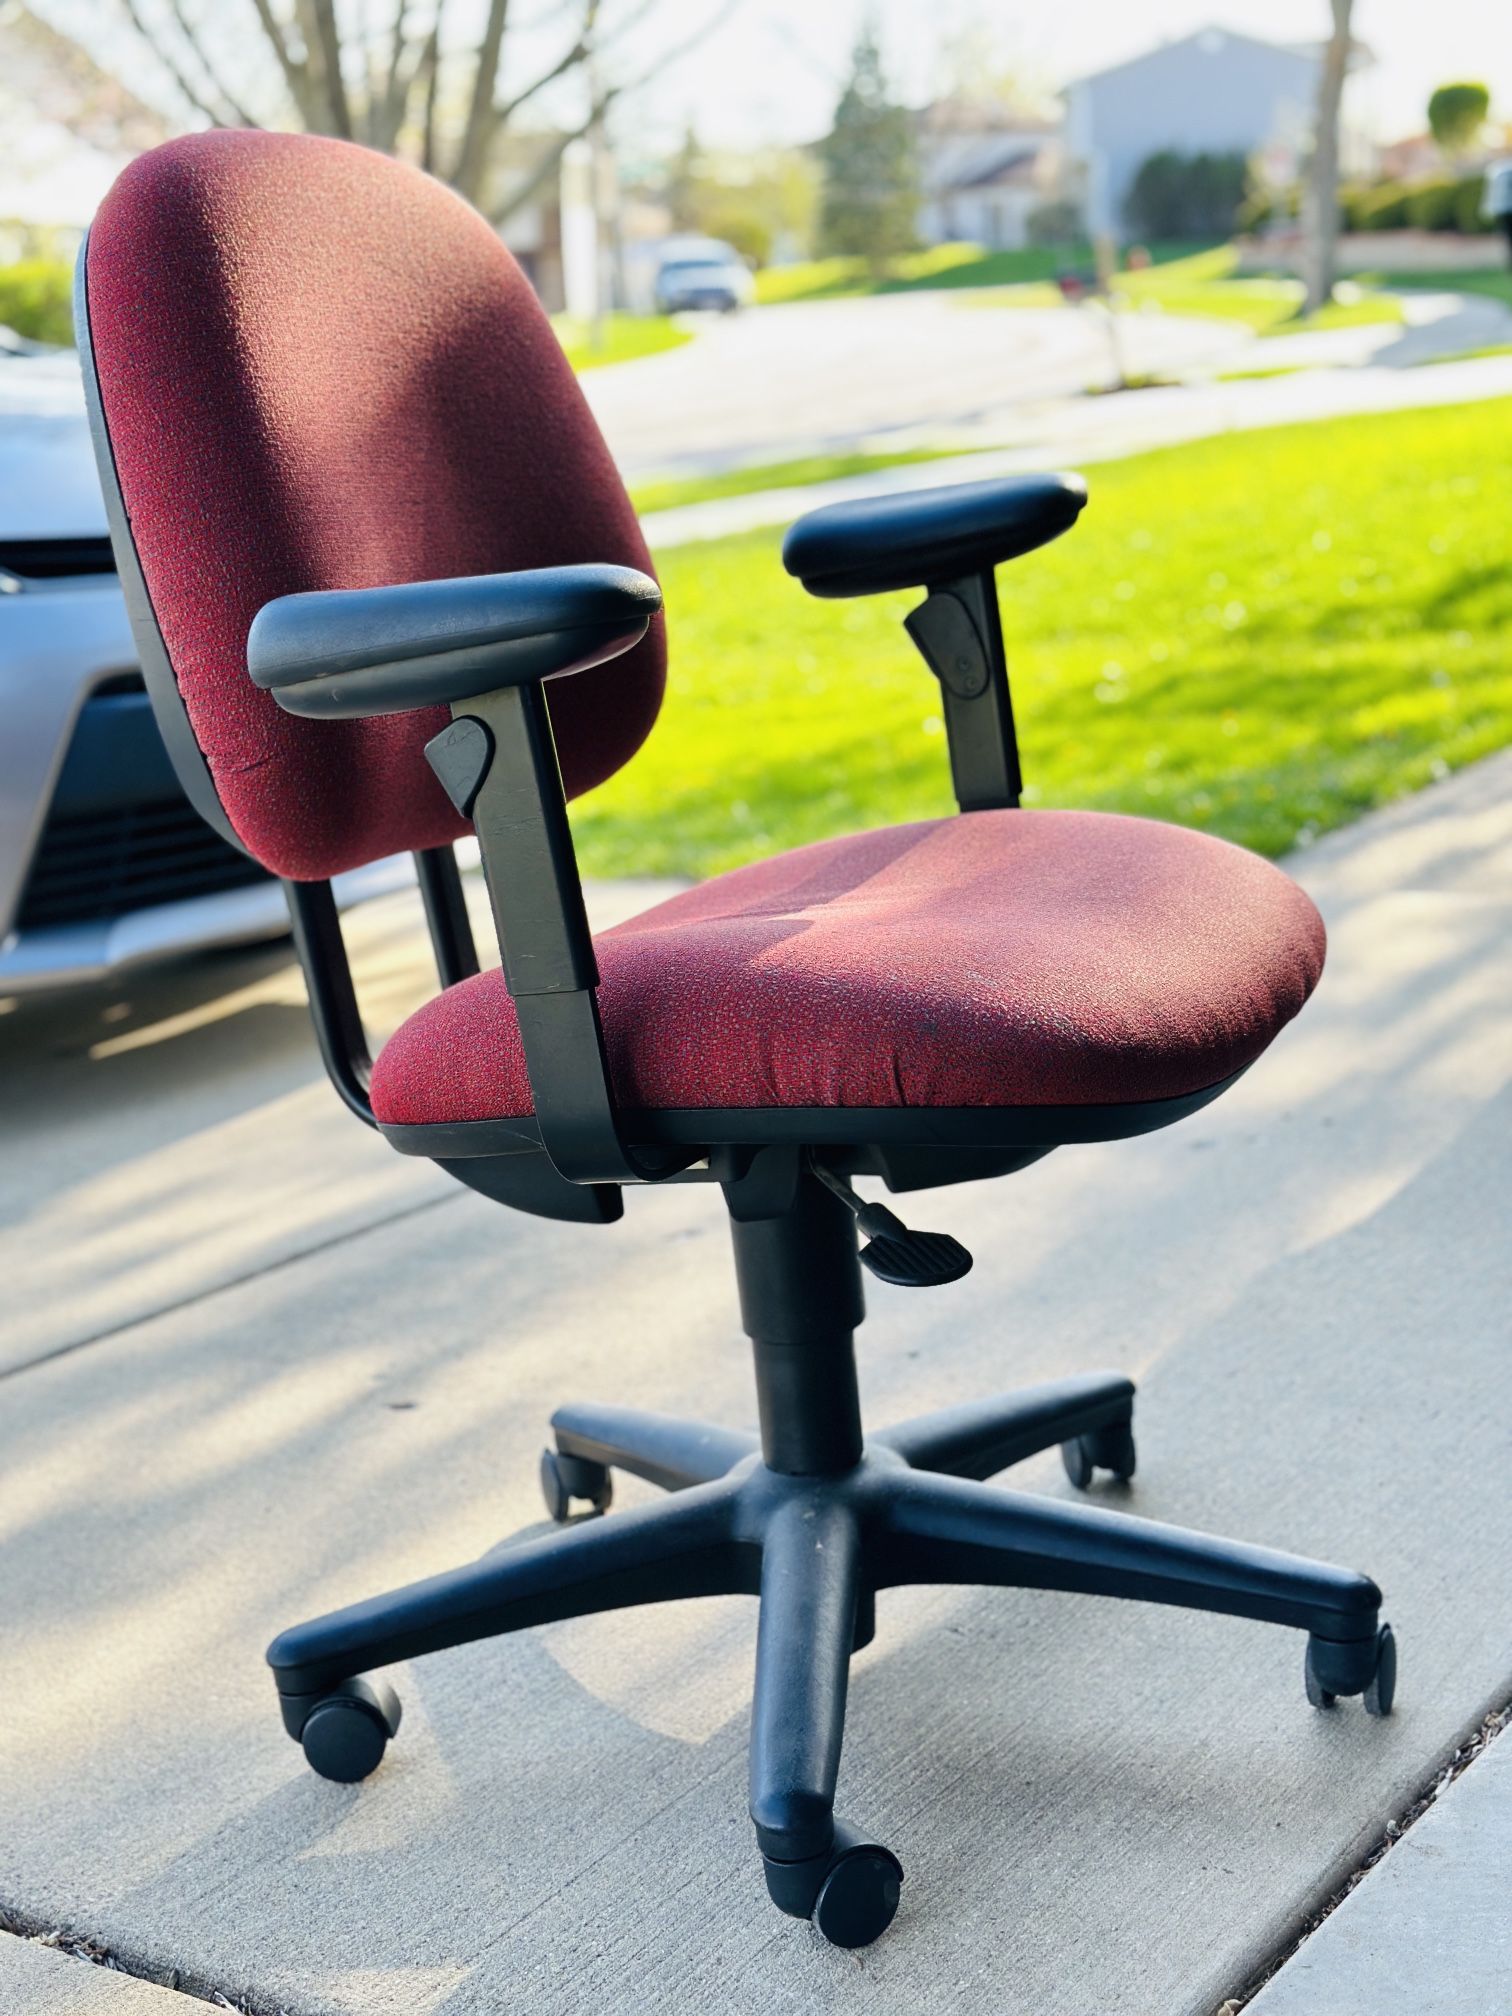 Office Adjusted Chair 